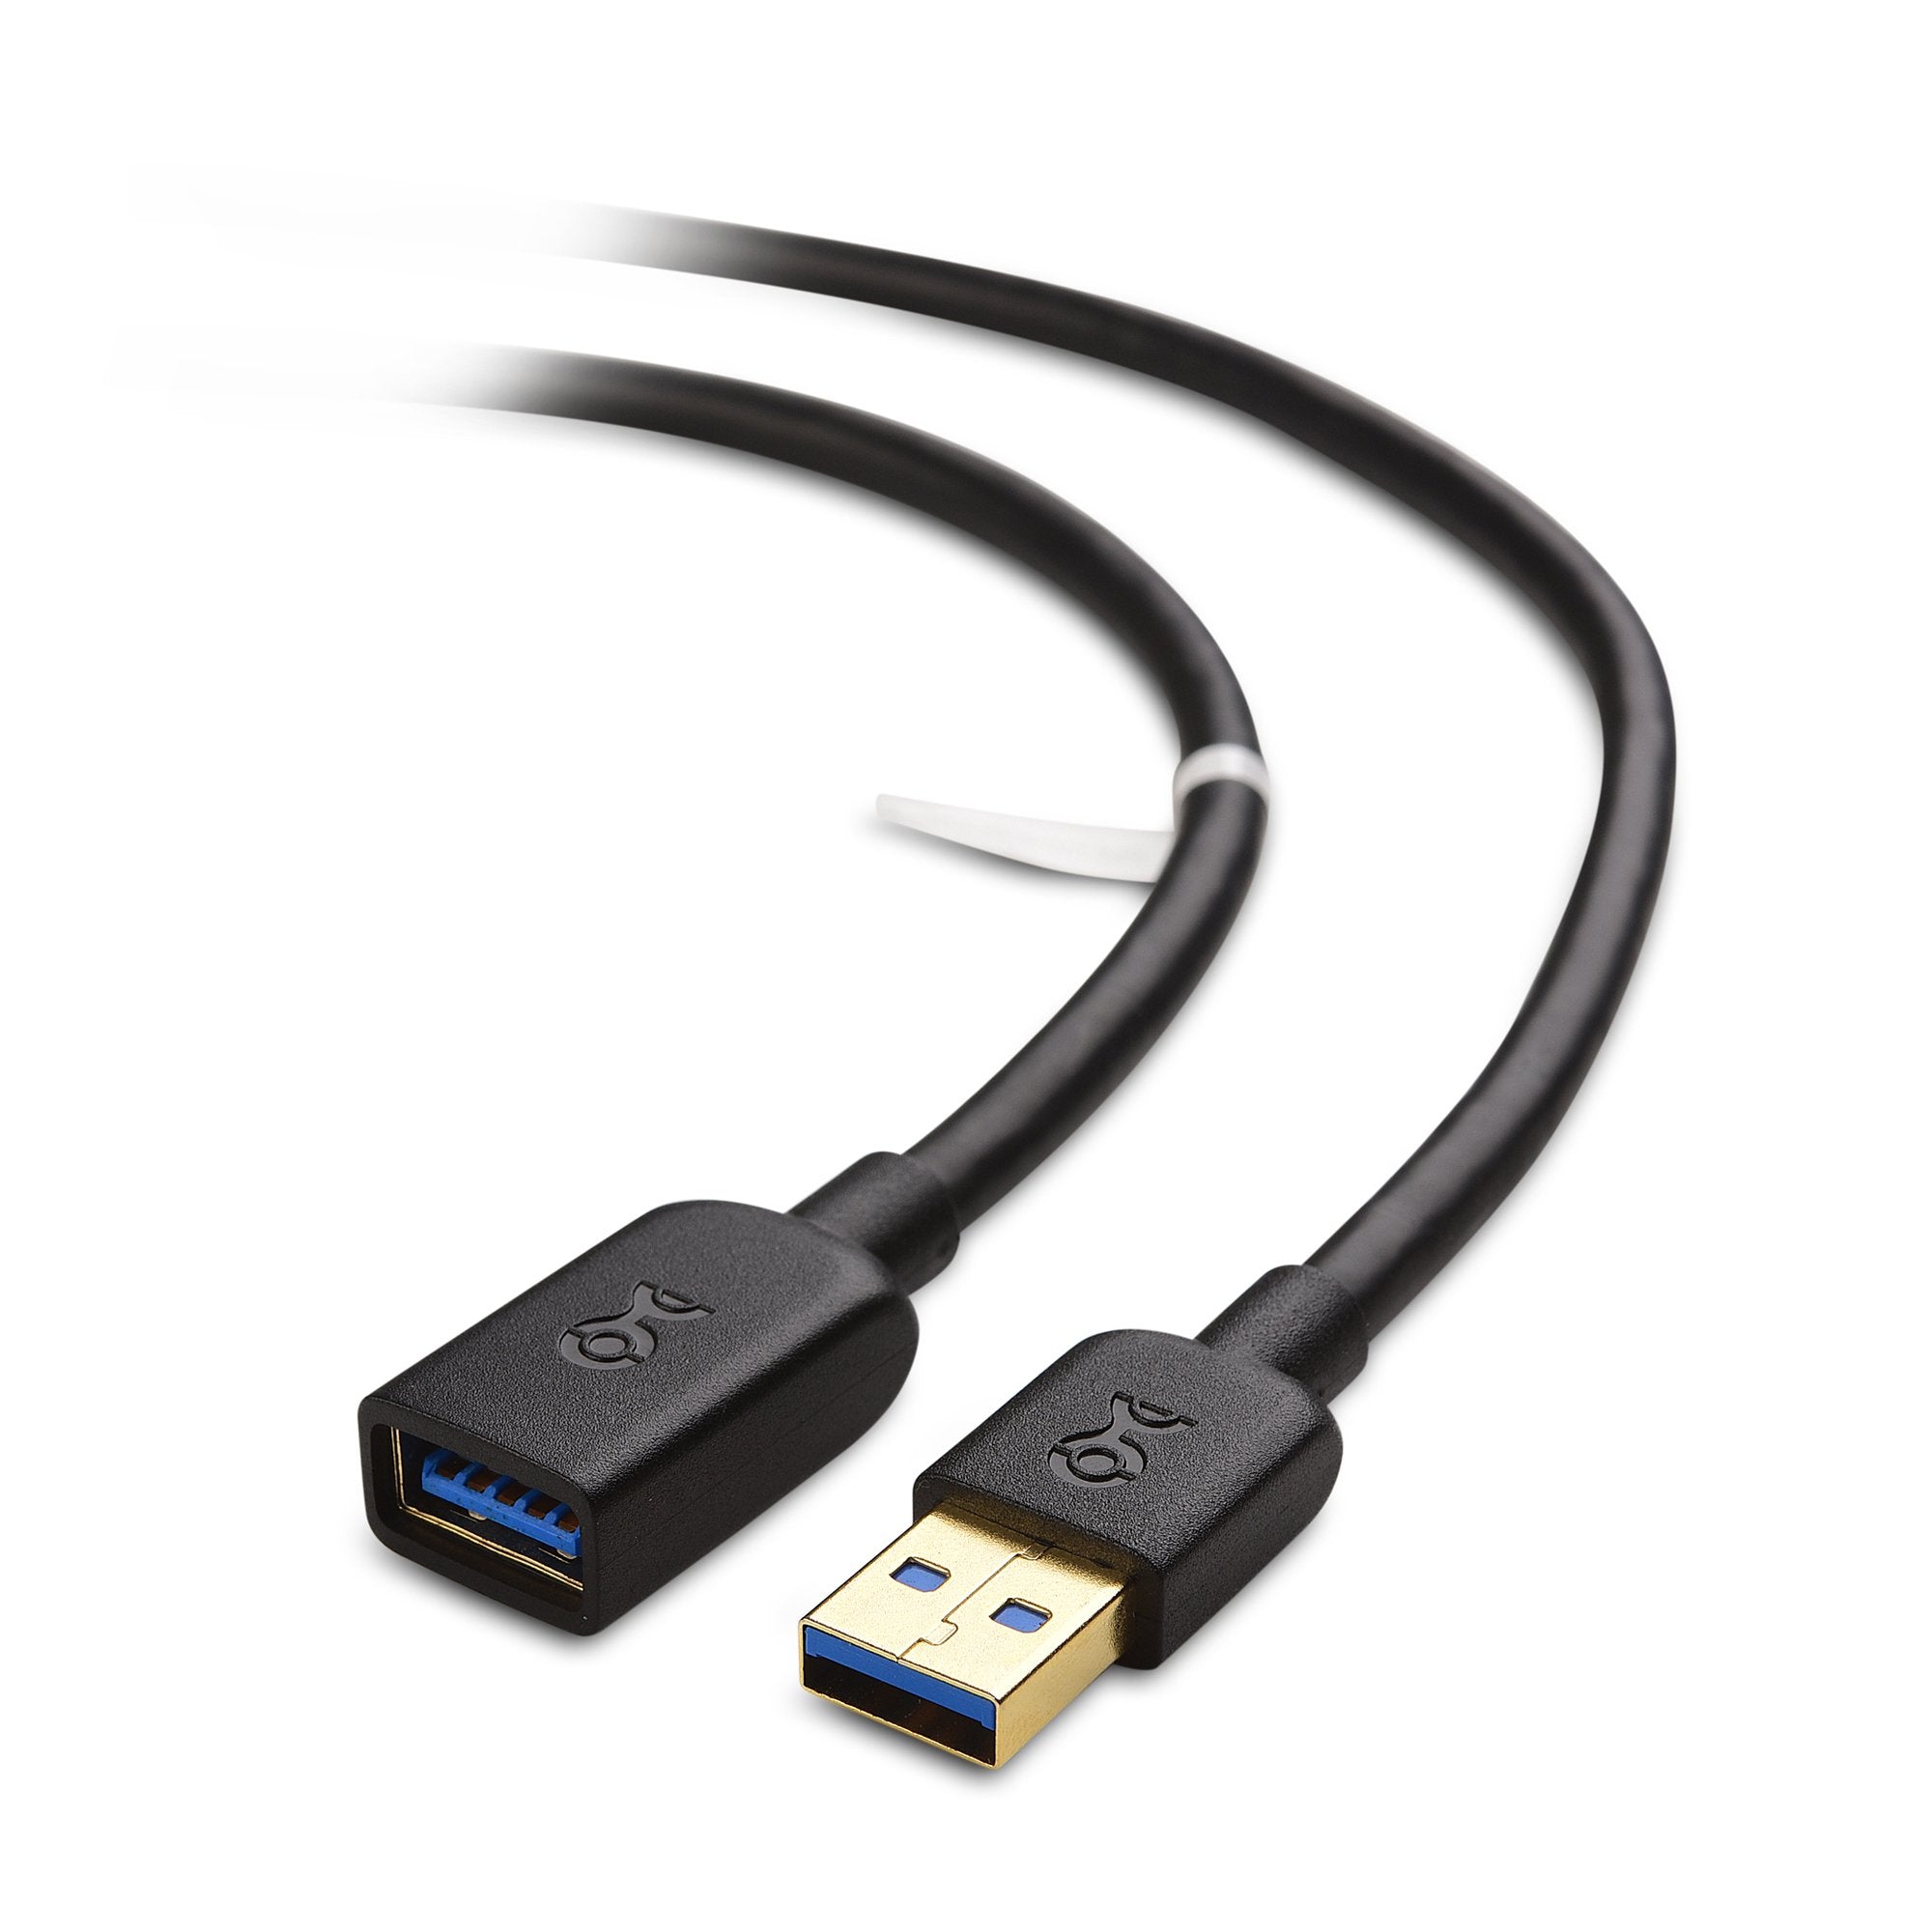 Cable Matters Long USB to USB Extension Cable 10 ft